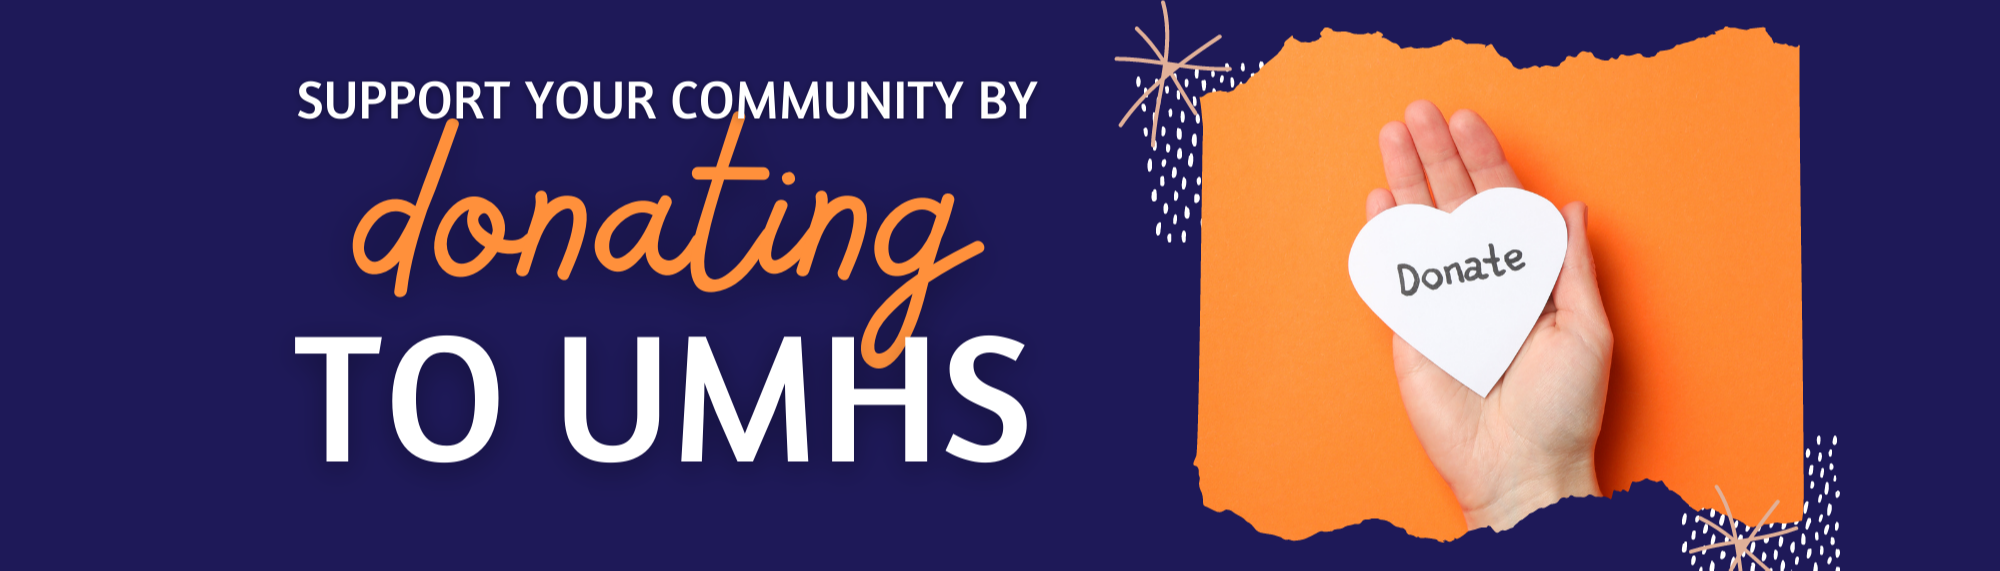 Donate to UMHS Banner